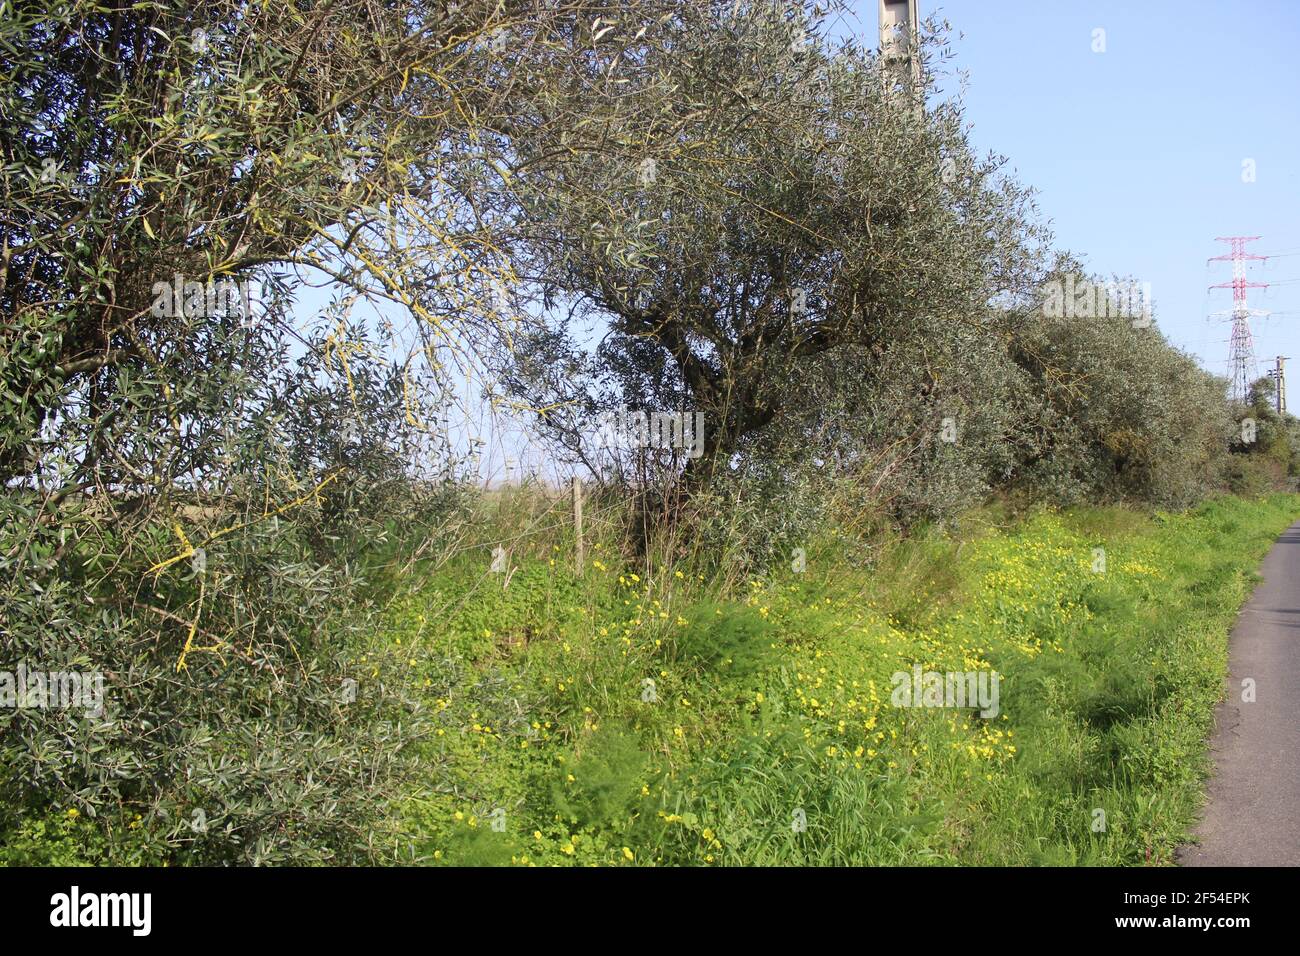 Olive trees landscape, next to the road Stock Photo